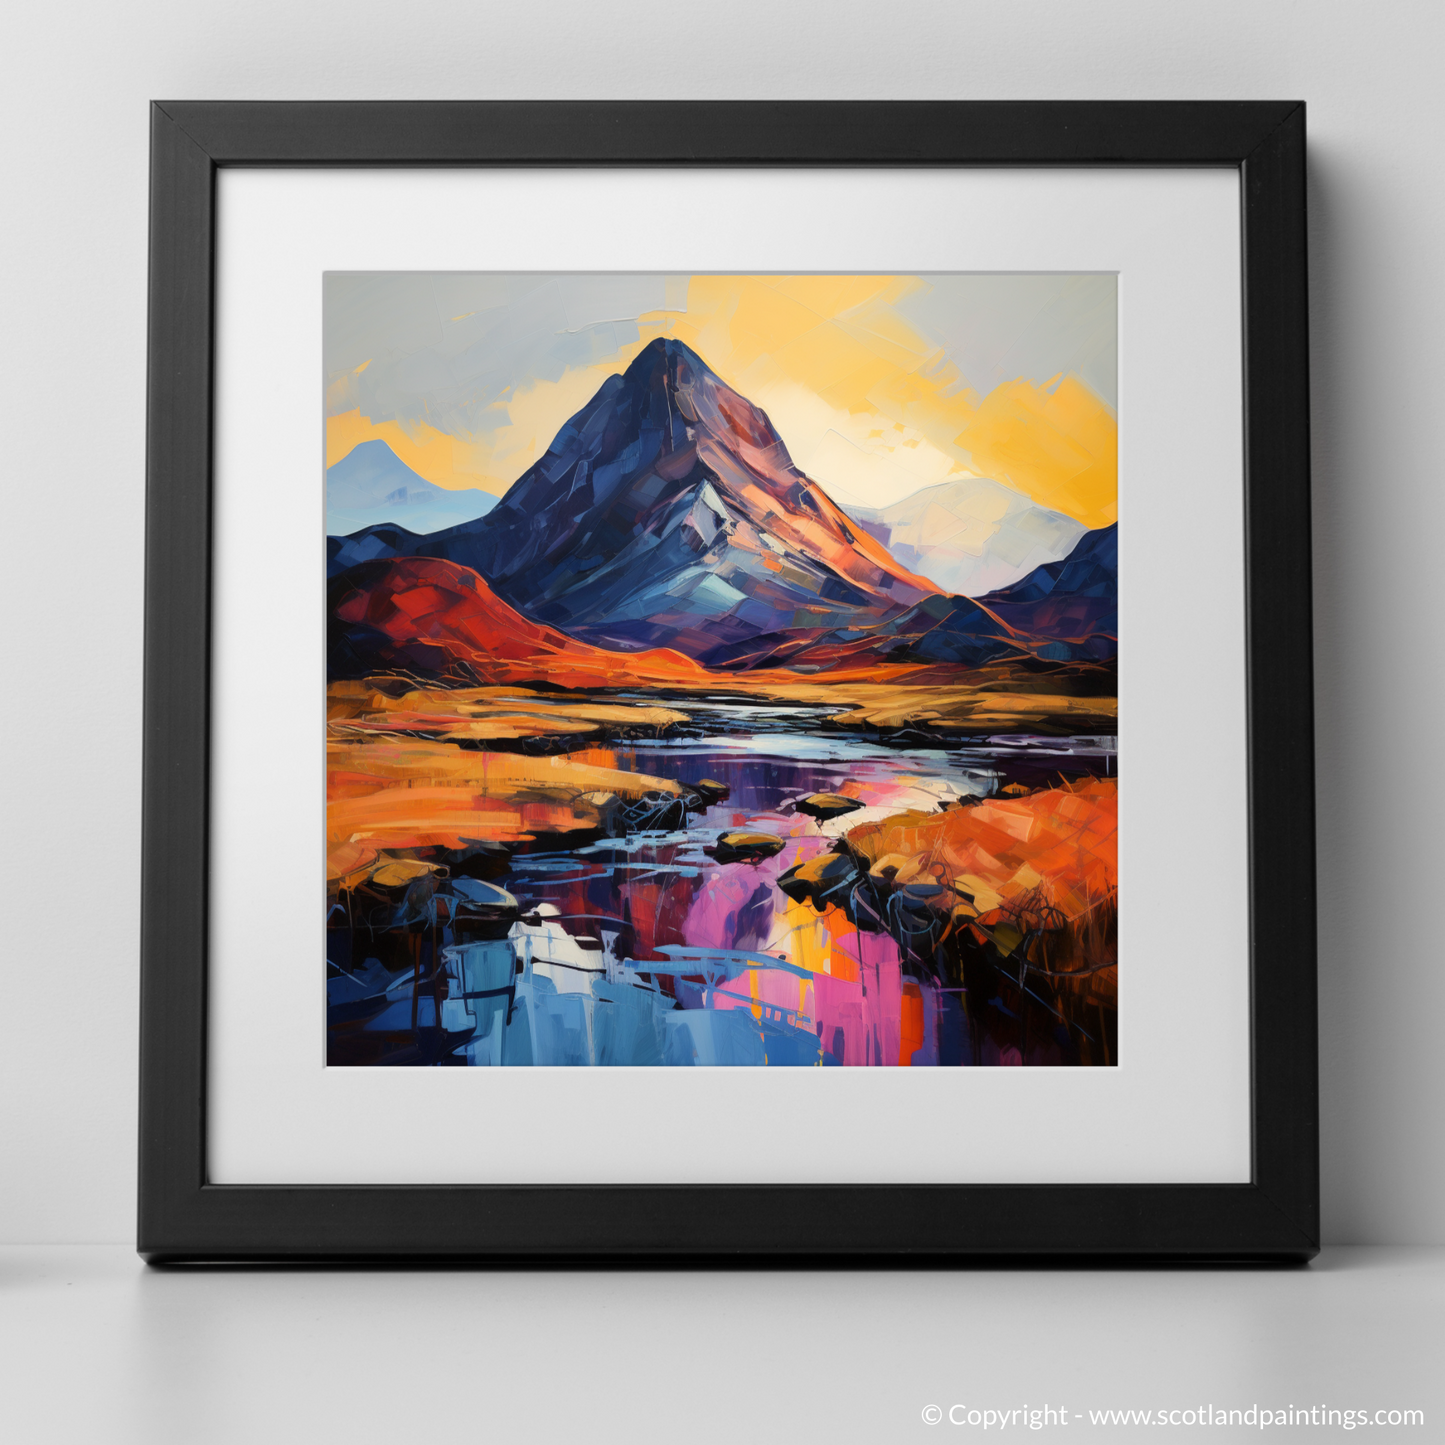 Art Print of Silhouetted peaks in Glencoe with a black frame